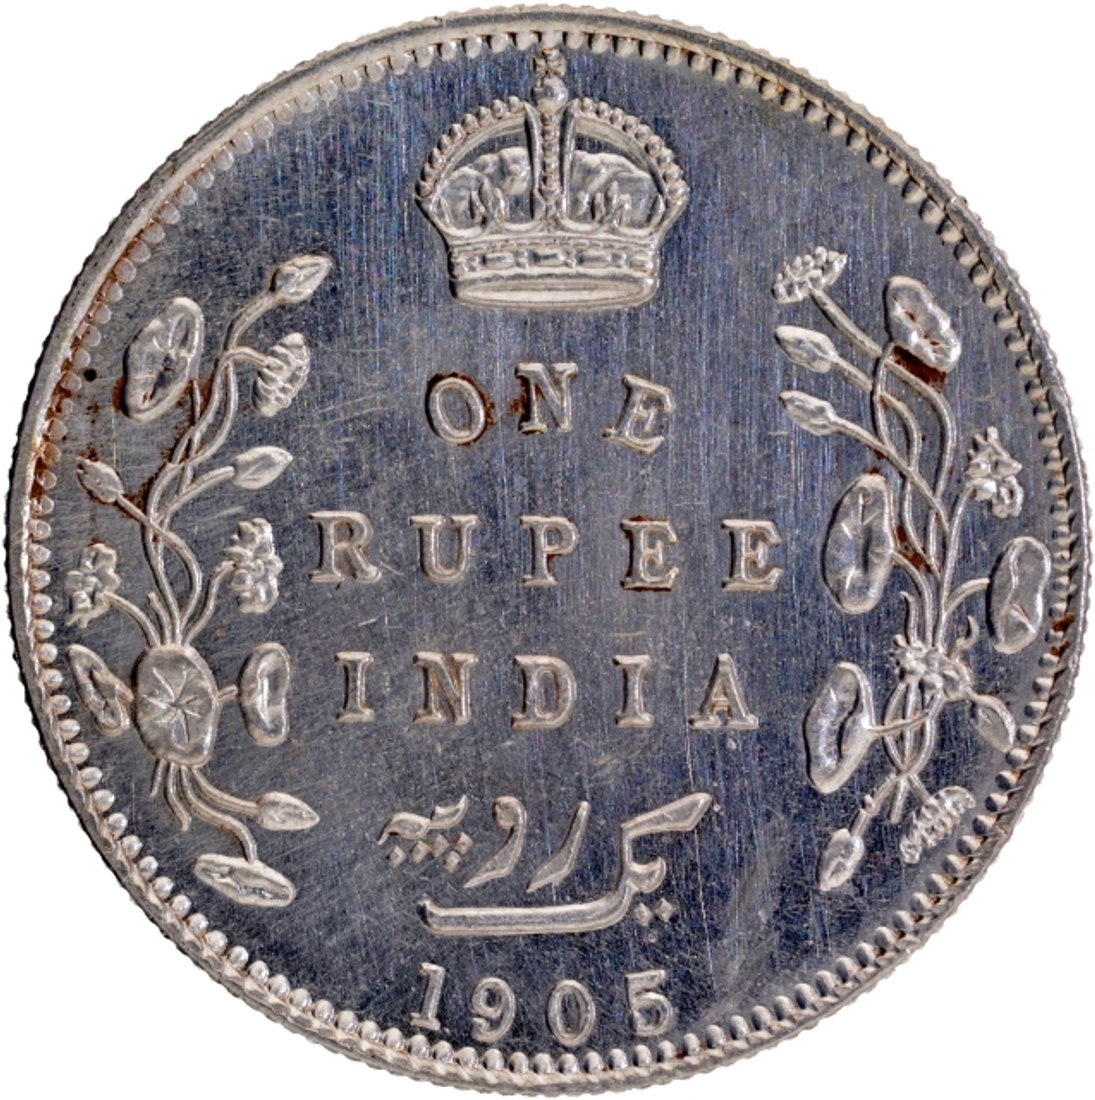 Silver One Rupee Coin of King Edward VII of Bombay Mint of 1905.